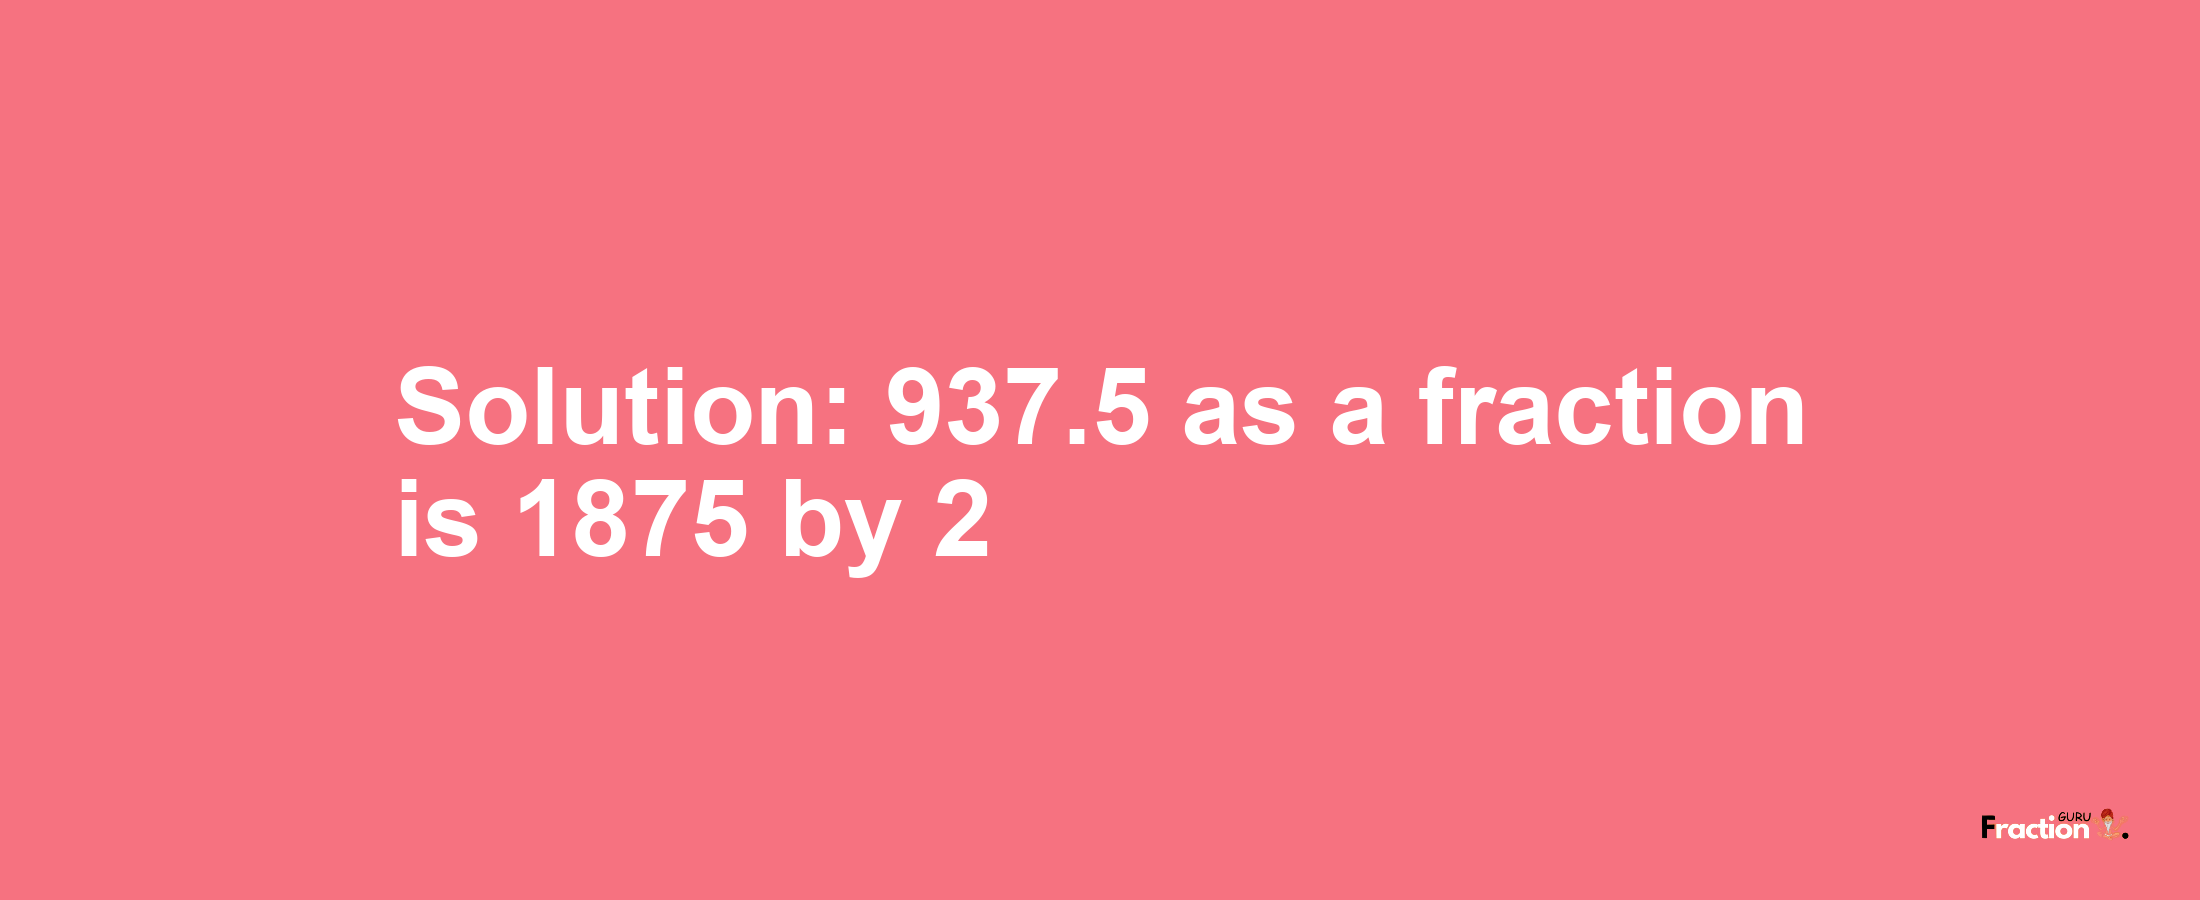 Solution:937.5 as a fraction is 1875/2